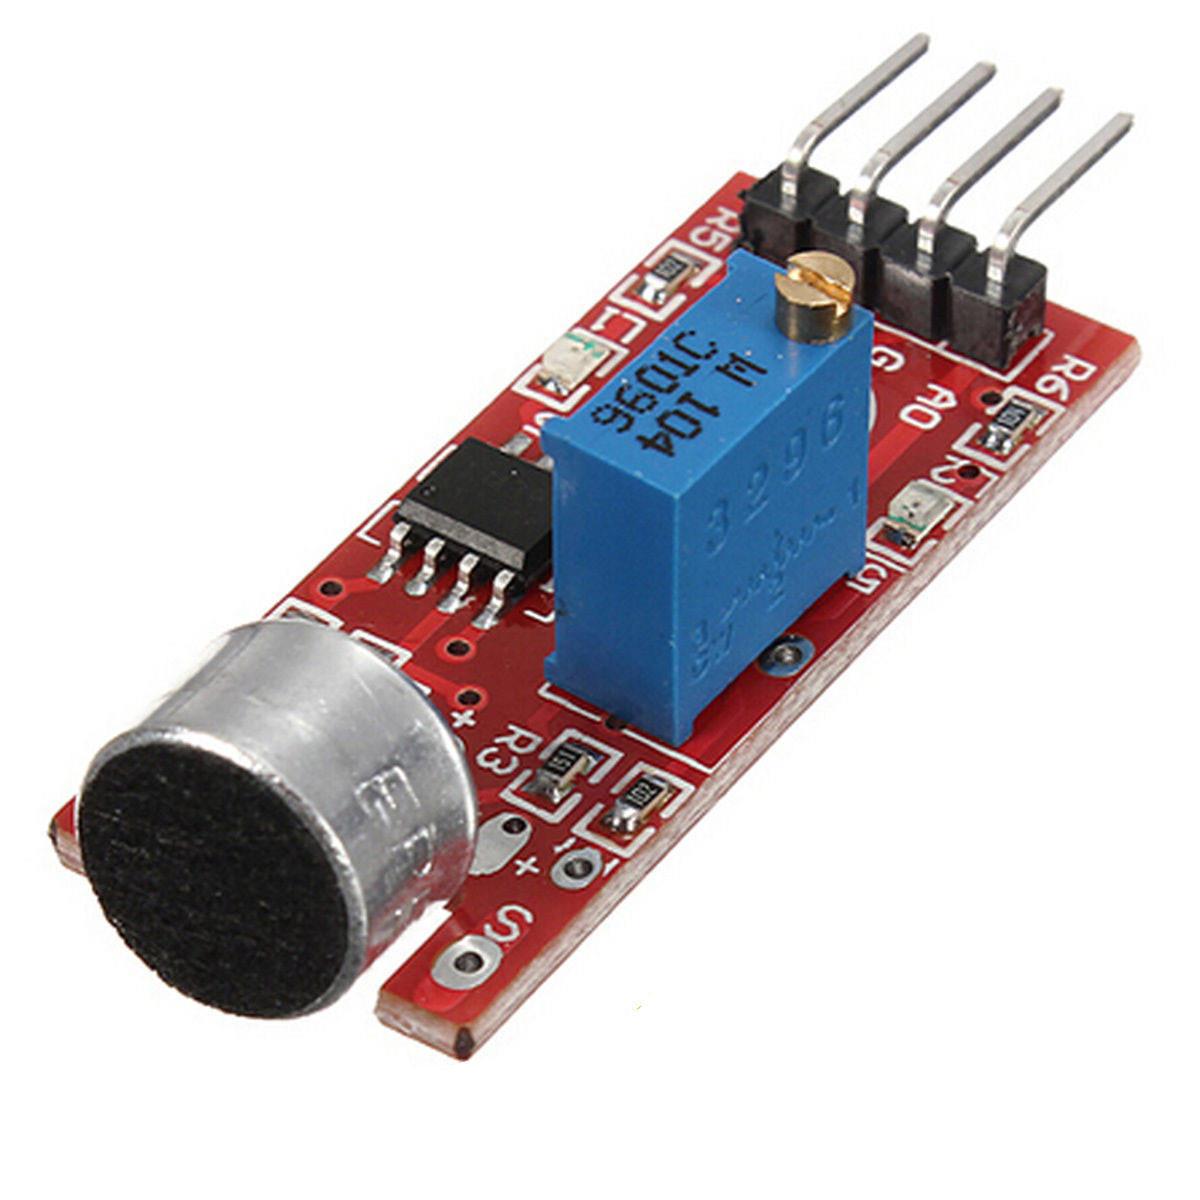 KY-037 Microphone sound detection module